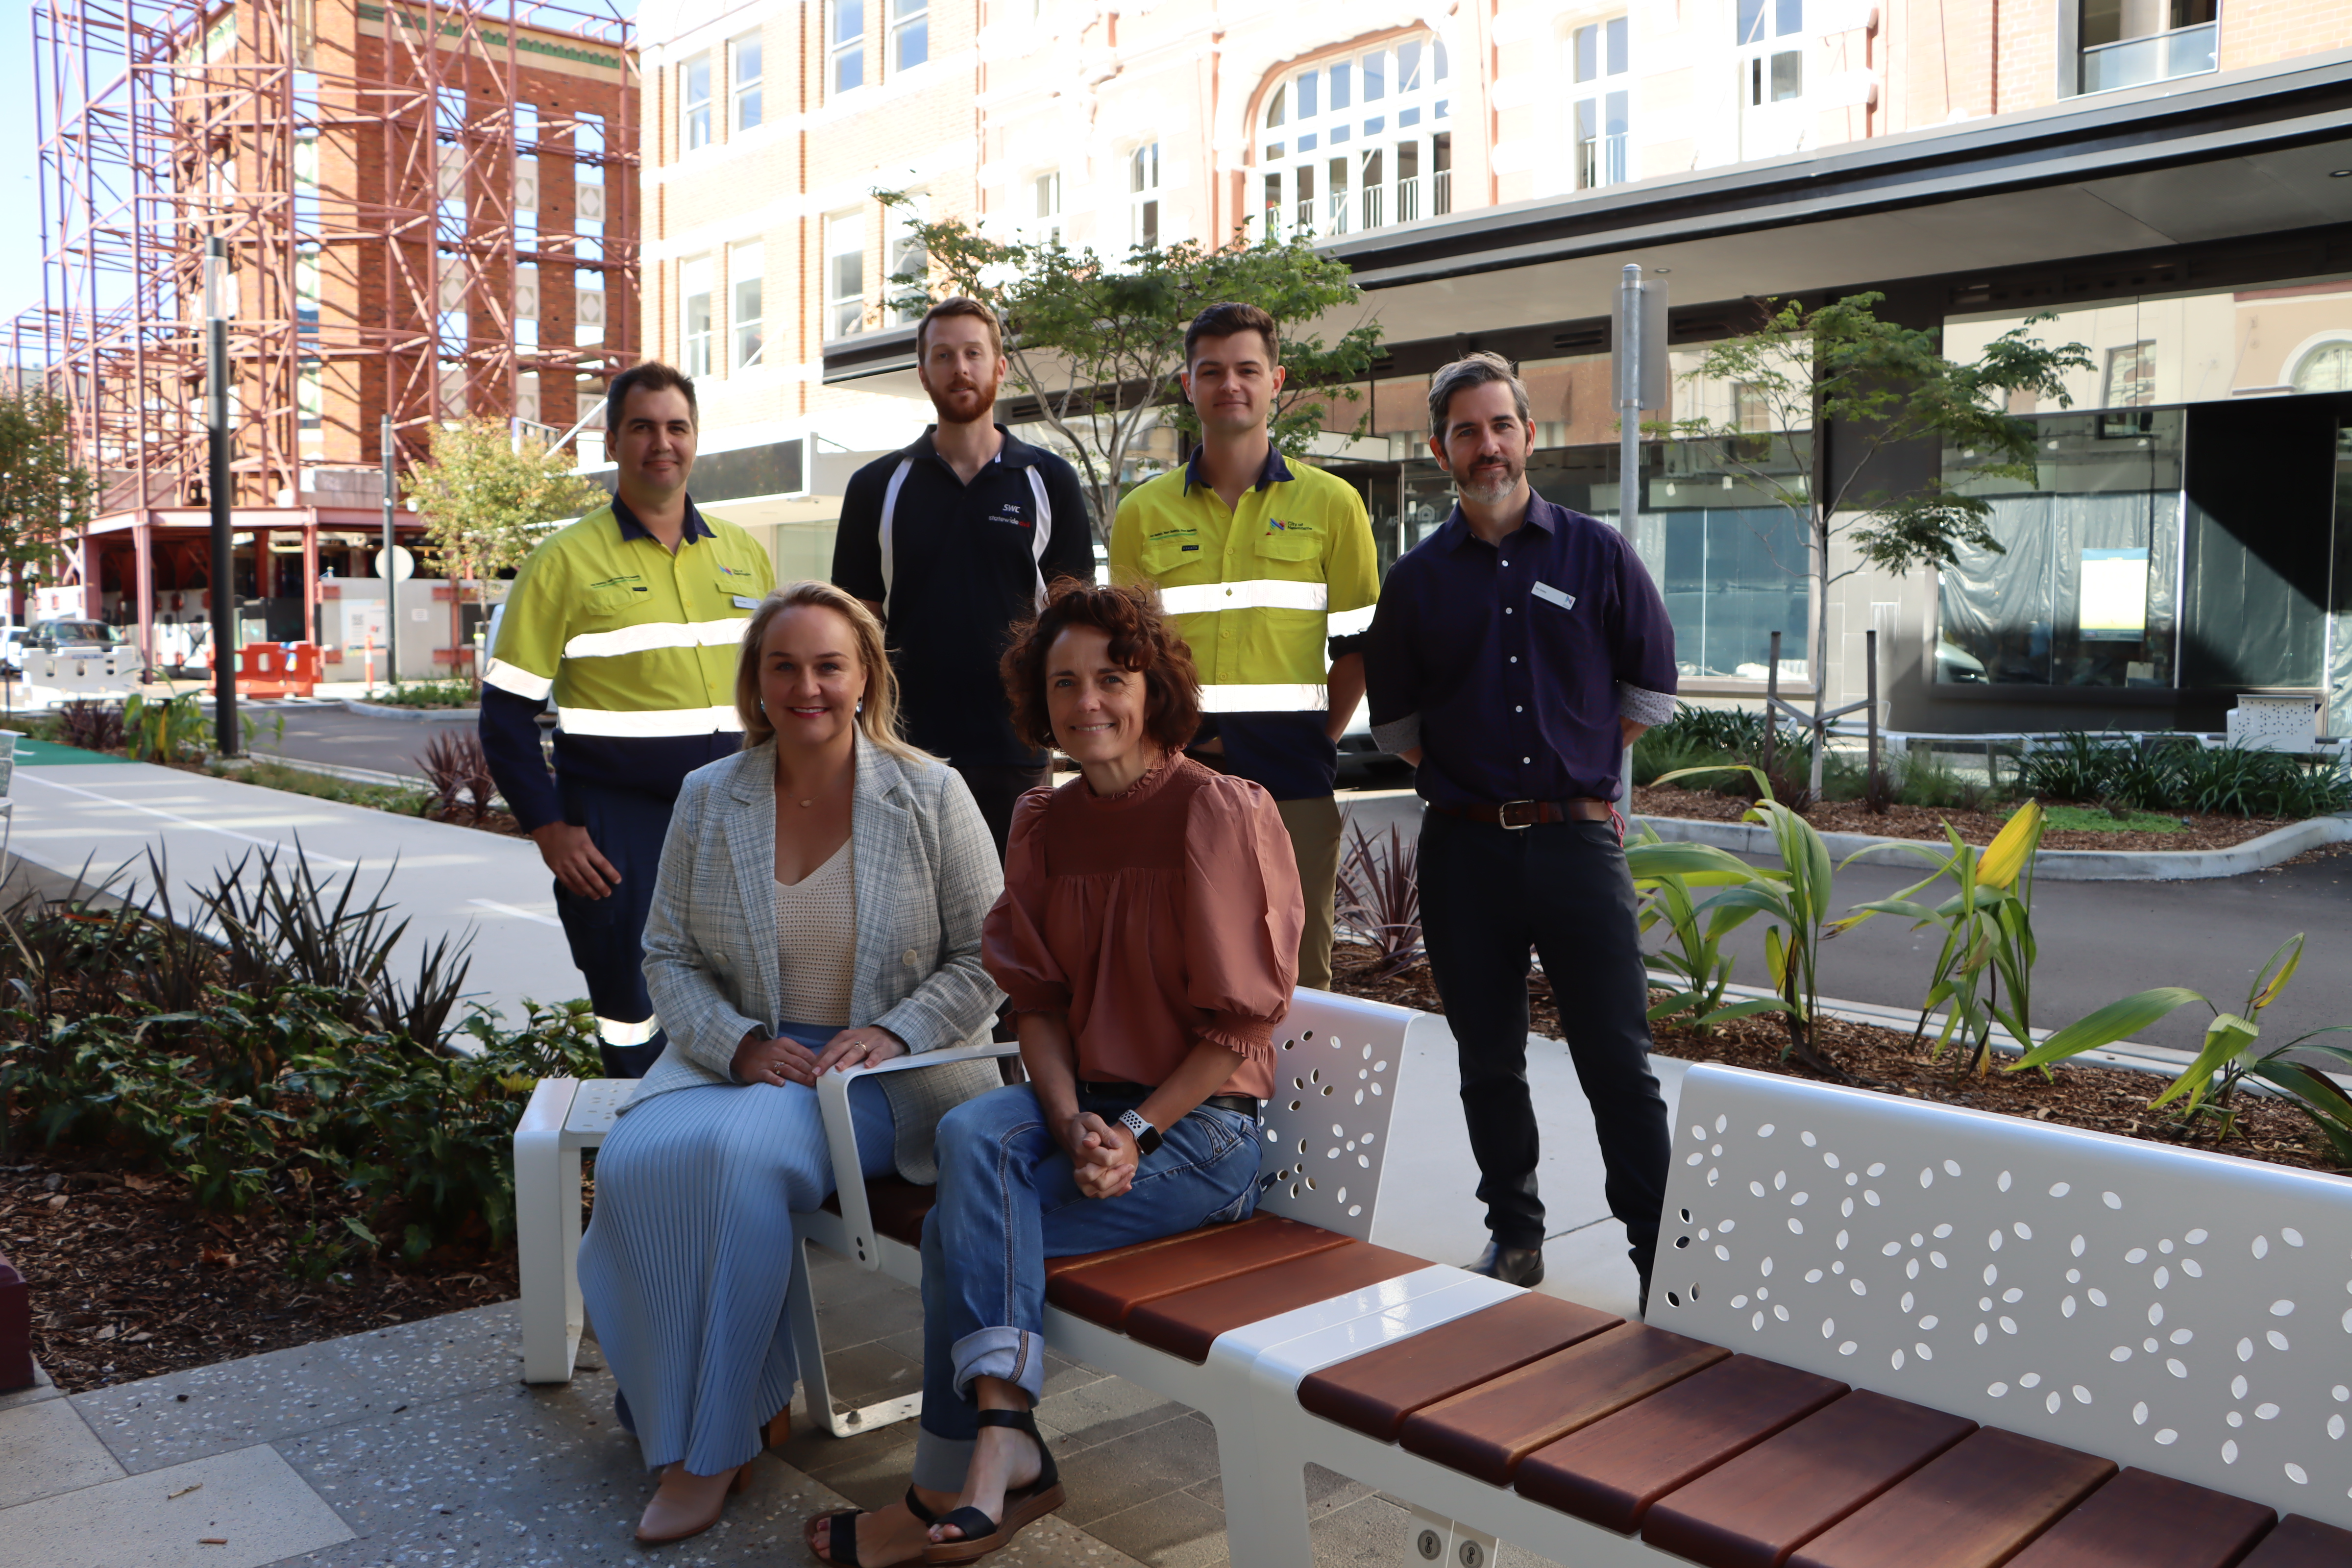 Lord-Mayor-Nuatali-Nelmes-with-Angela-Hailey-from-Studio-Melt-with-the-project-team-and-construction-contractor.JPG